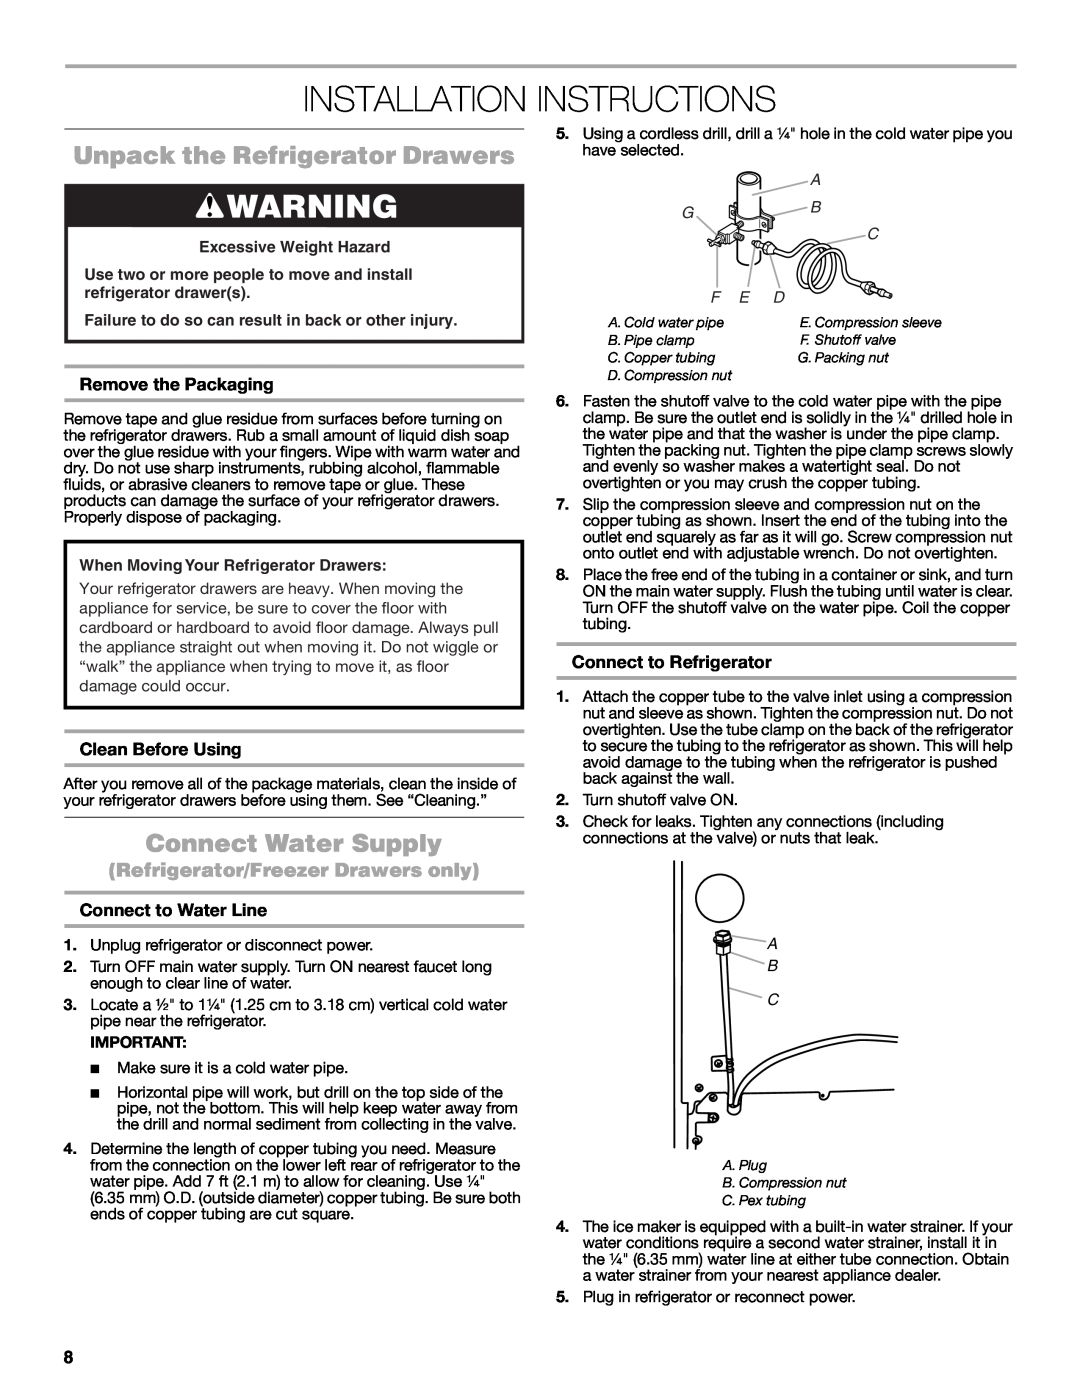 Jenn-Air W10549548A Installation Instructions, Unpack the Refrigerator Drawers, Connect Water Supply, Remove the Packaging 